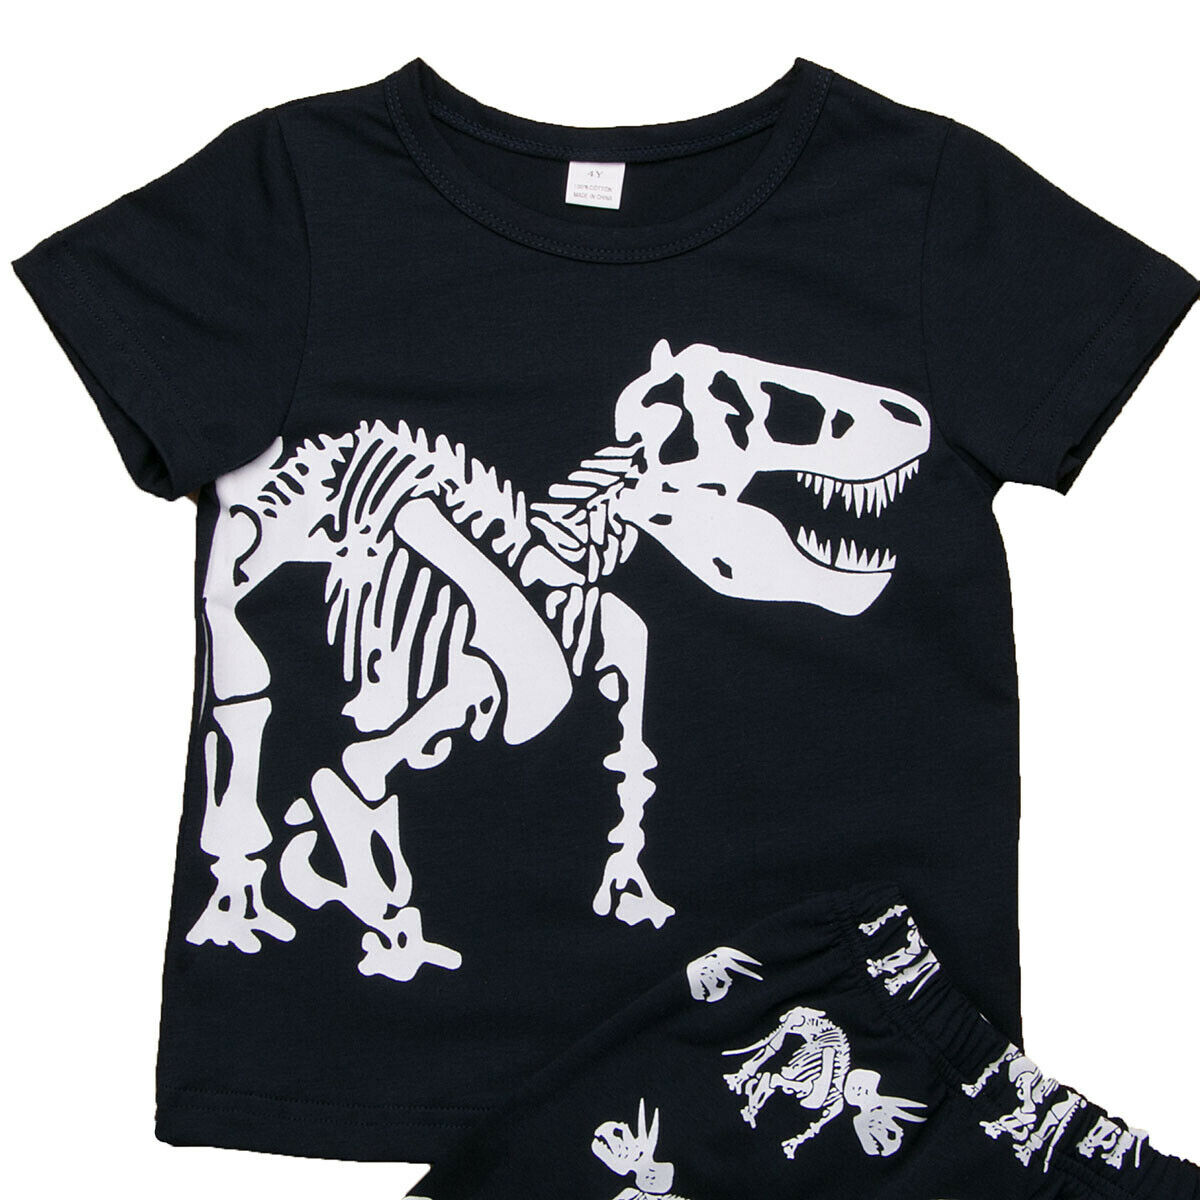 2021 Kid Little Boys Summer Outfit Dinosaur Short Sleeve with Shorts Clothes - image 3 of 5